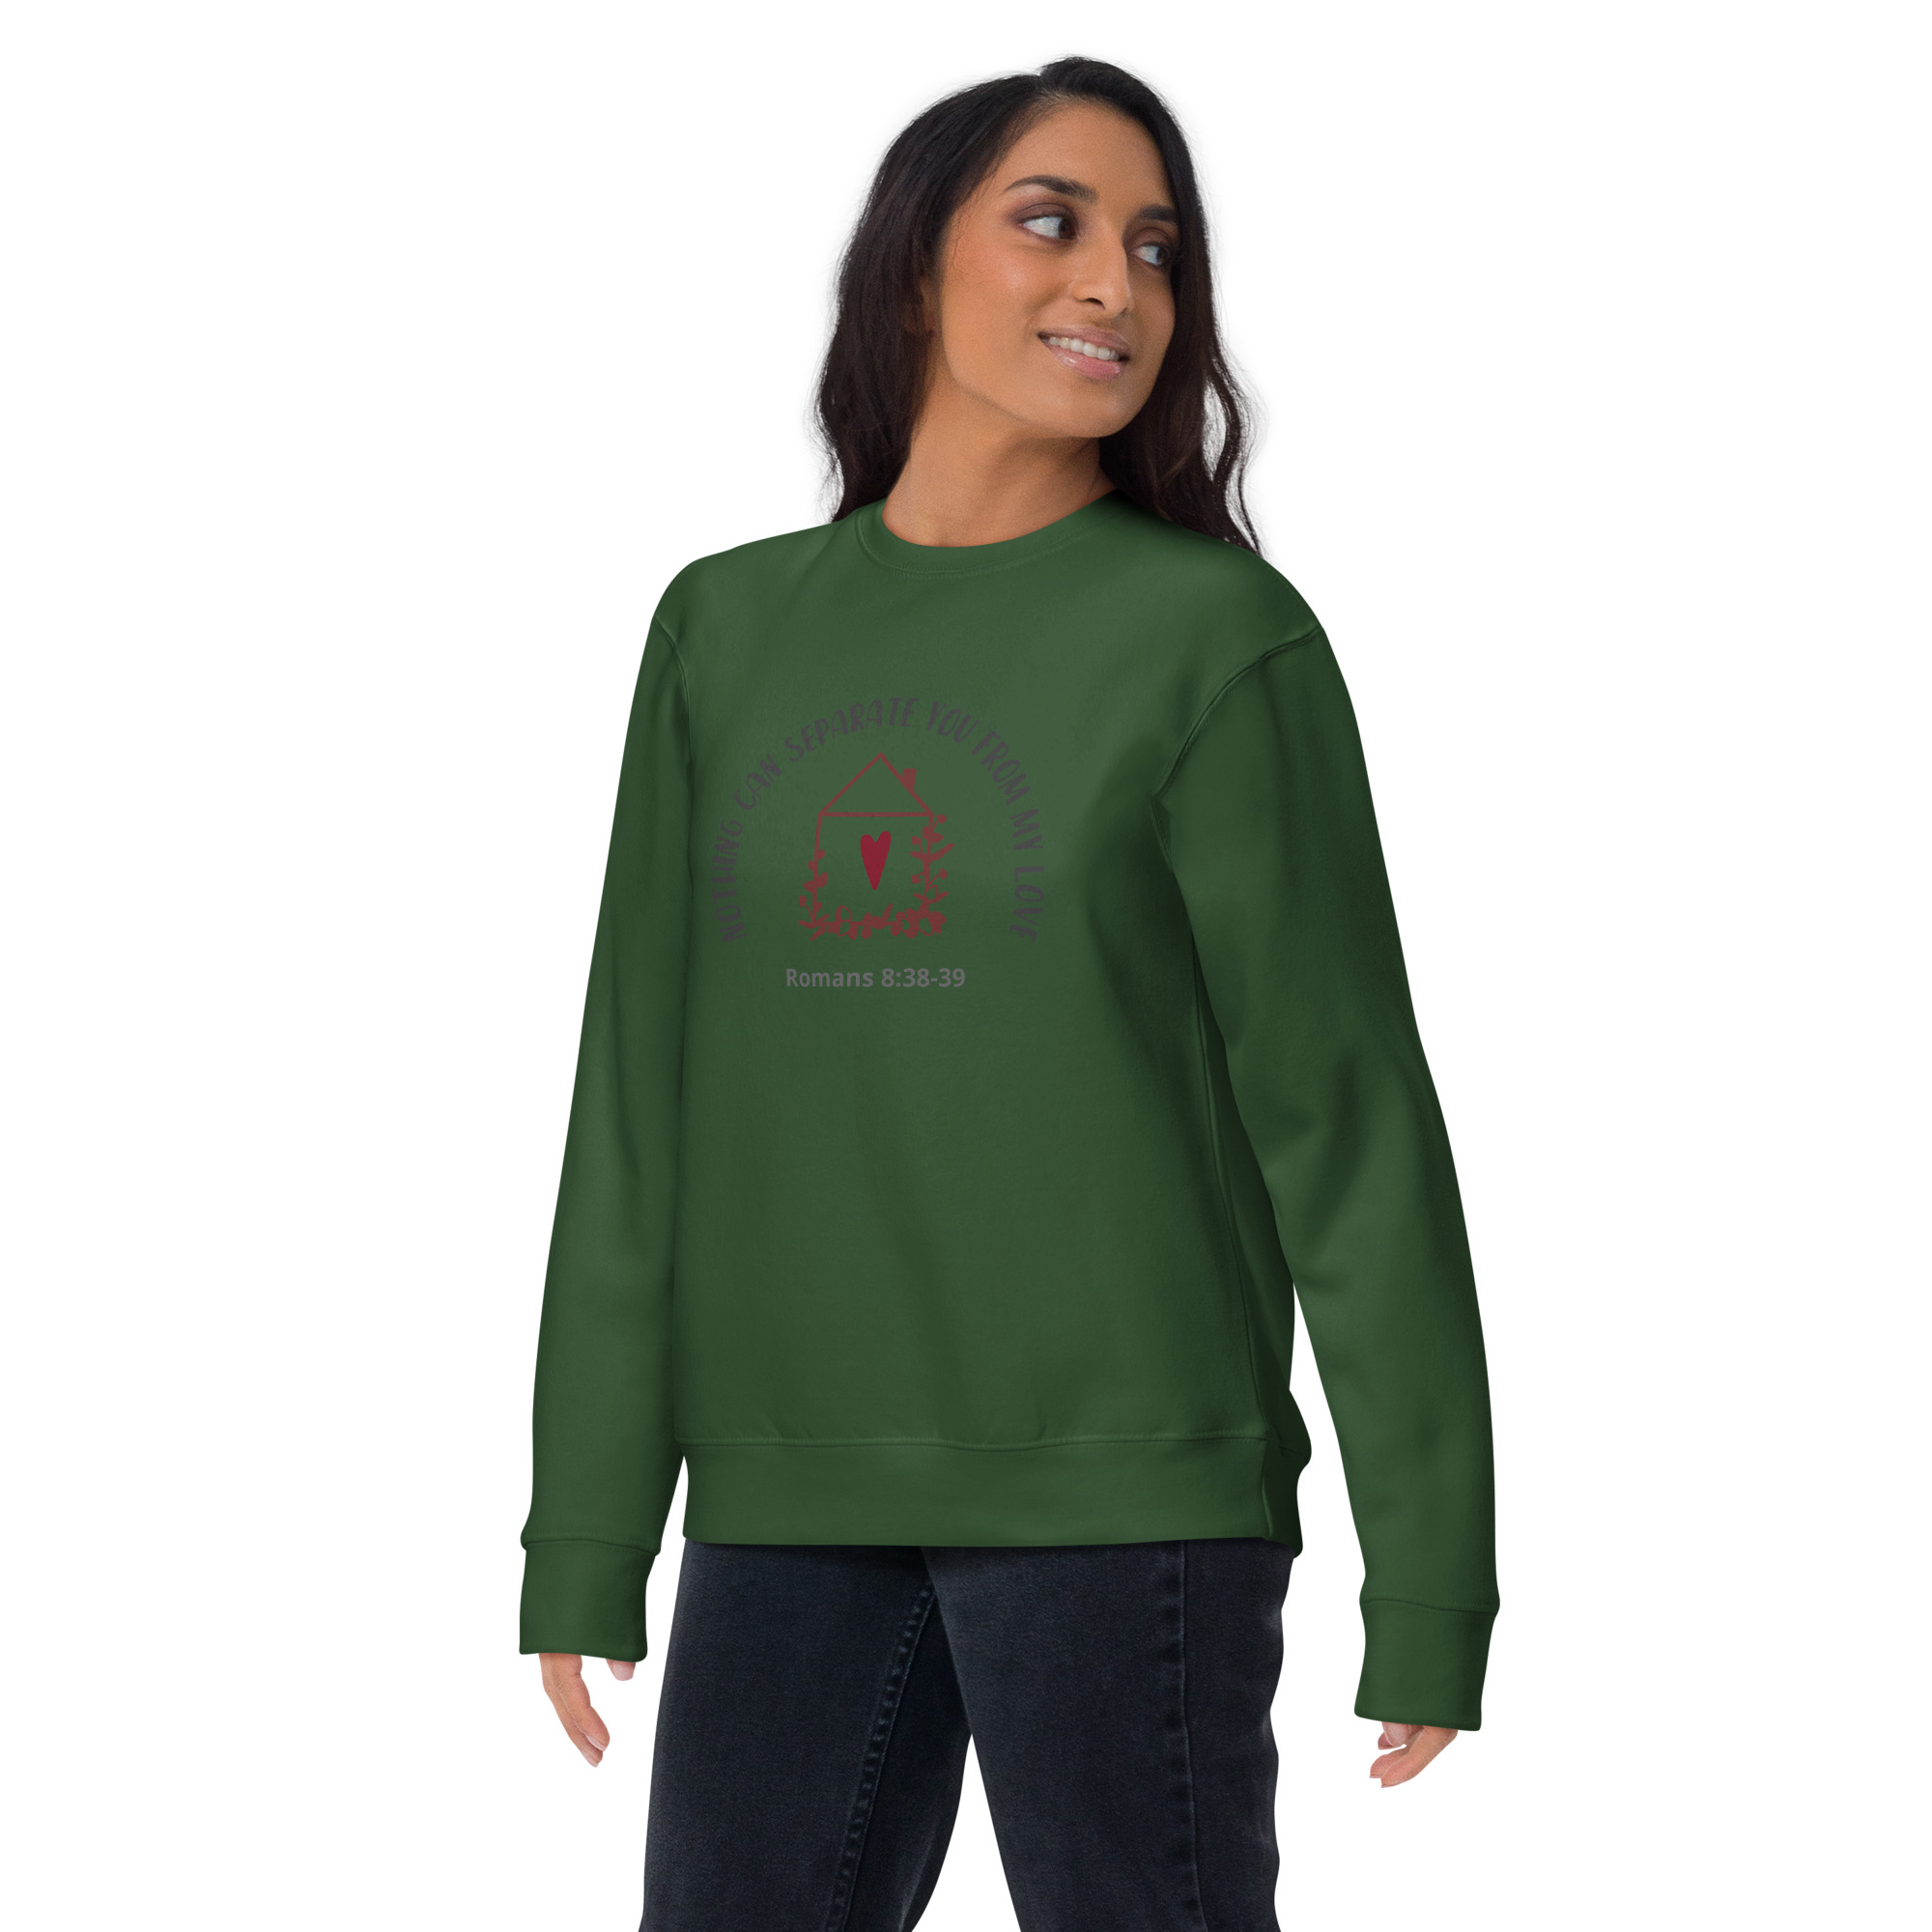 "Nothing Can Separate You From God's Love" Unisex Sweatshirt